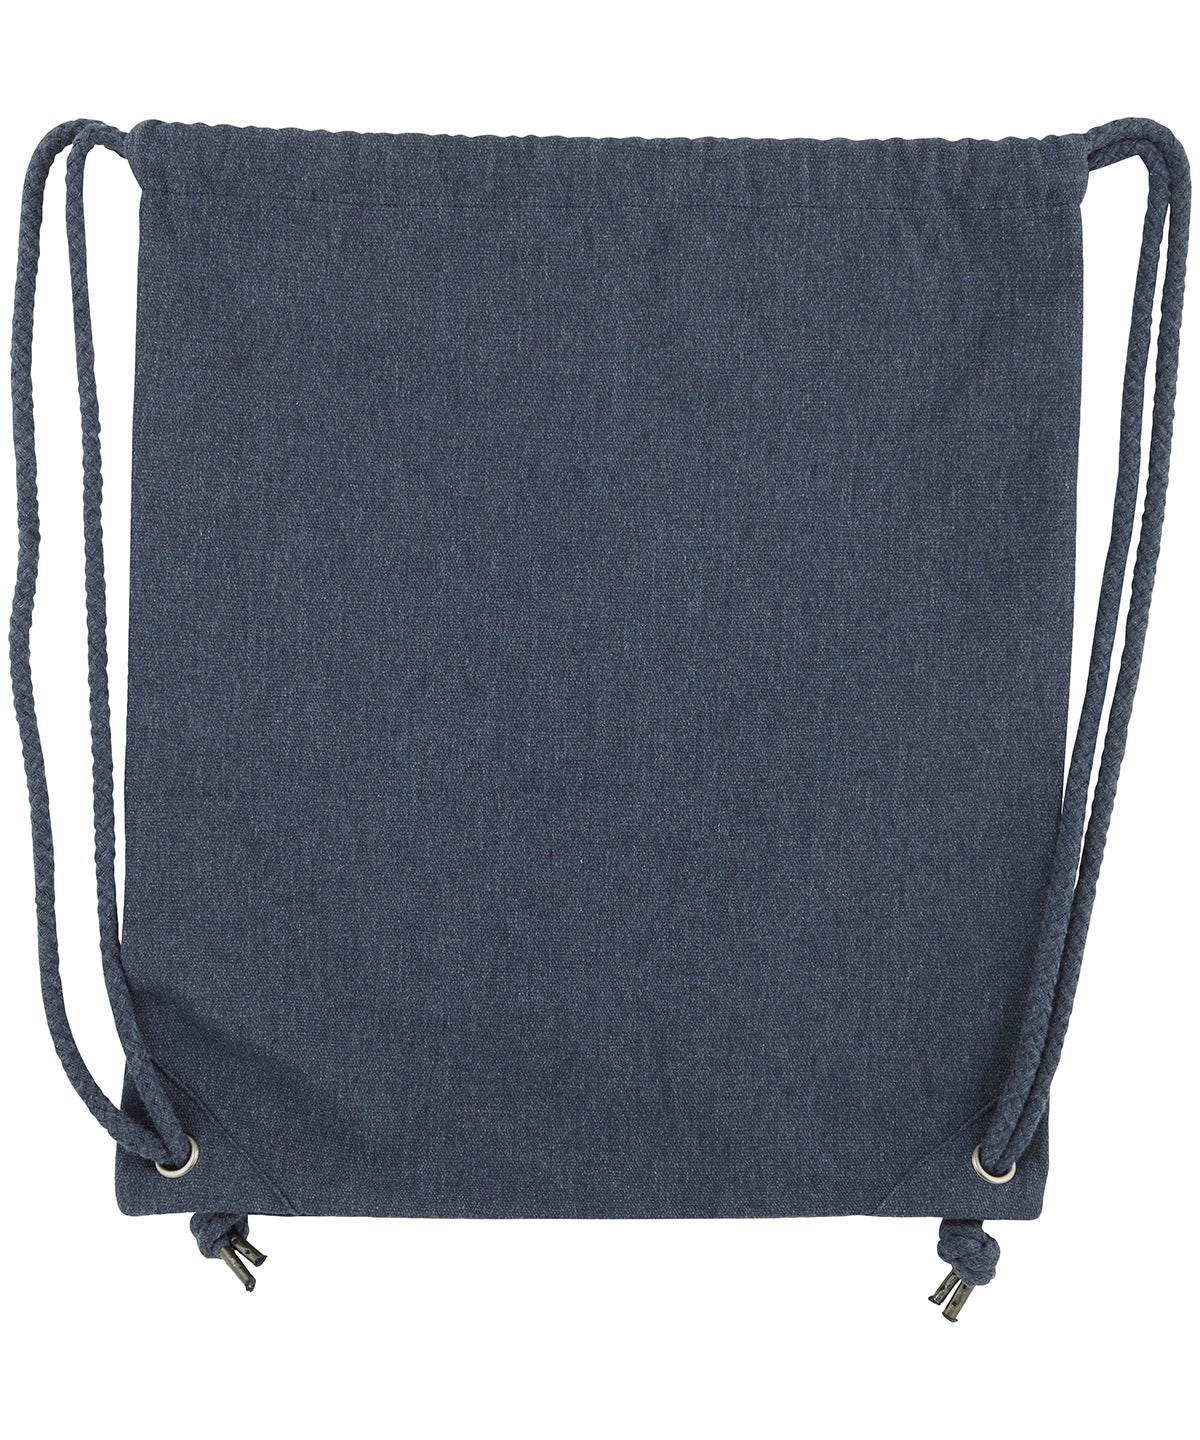 Recycled Canvas Woven Drawcord Gym Bag